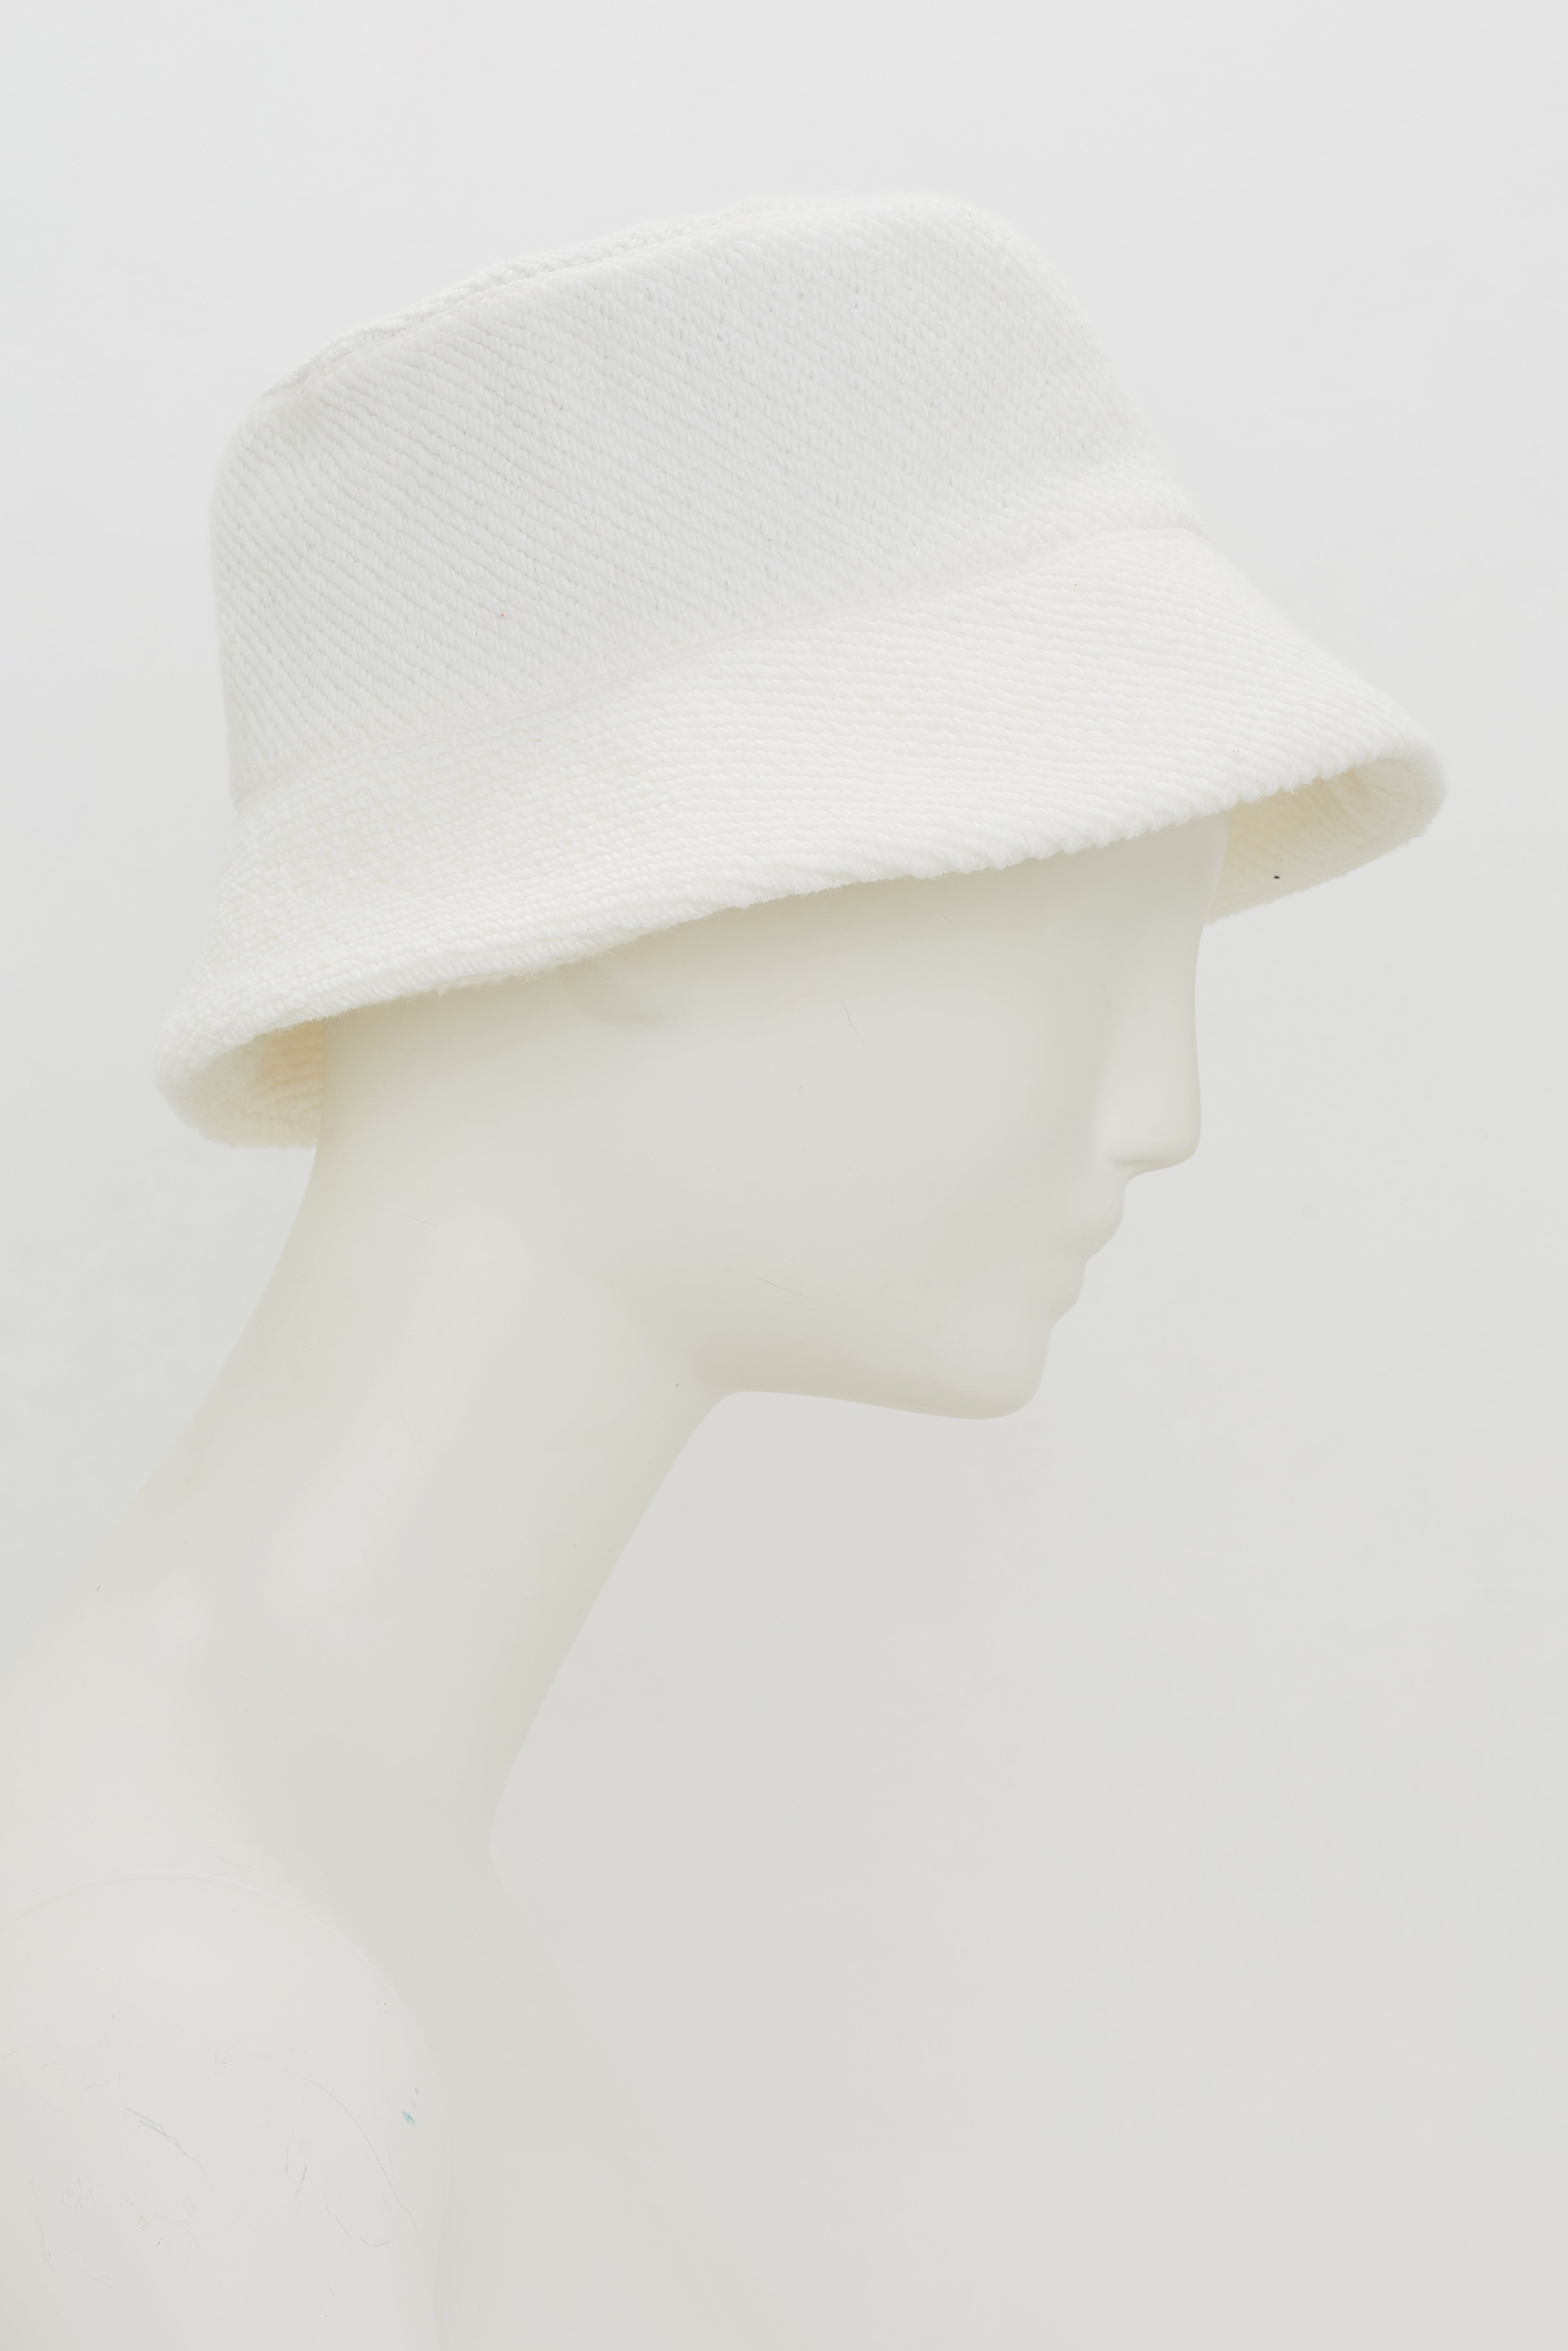 Dorothee-Schumacher-OUTLET-SALE-MODERN-TOWELLING-hat-Accessoires-OS-off-white-ARCHIVE-COLLECTION-3.jpg